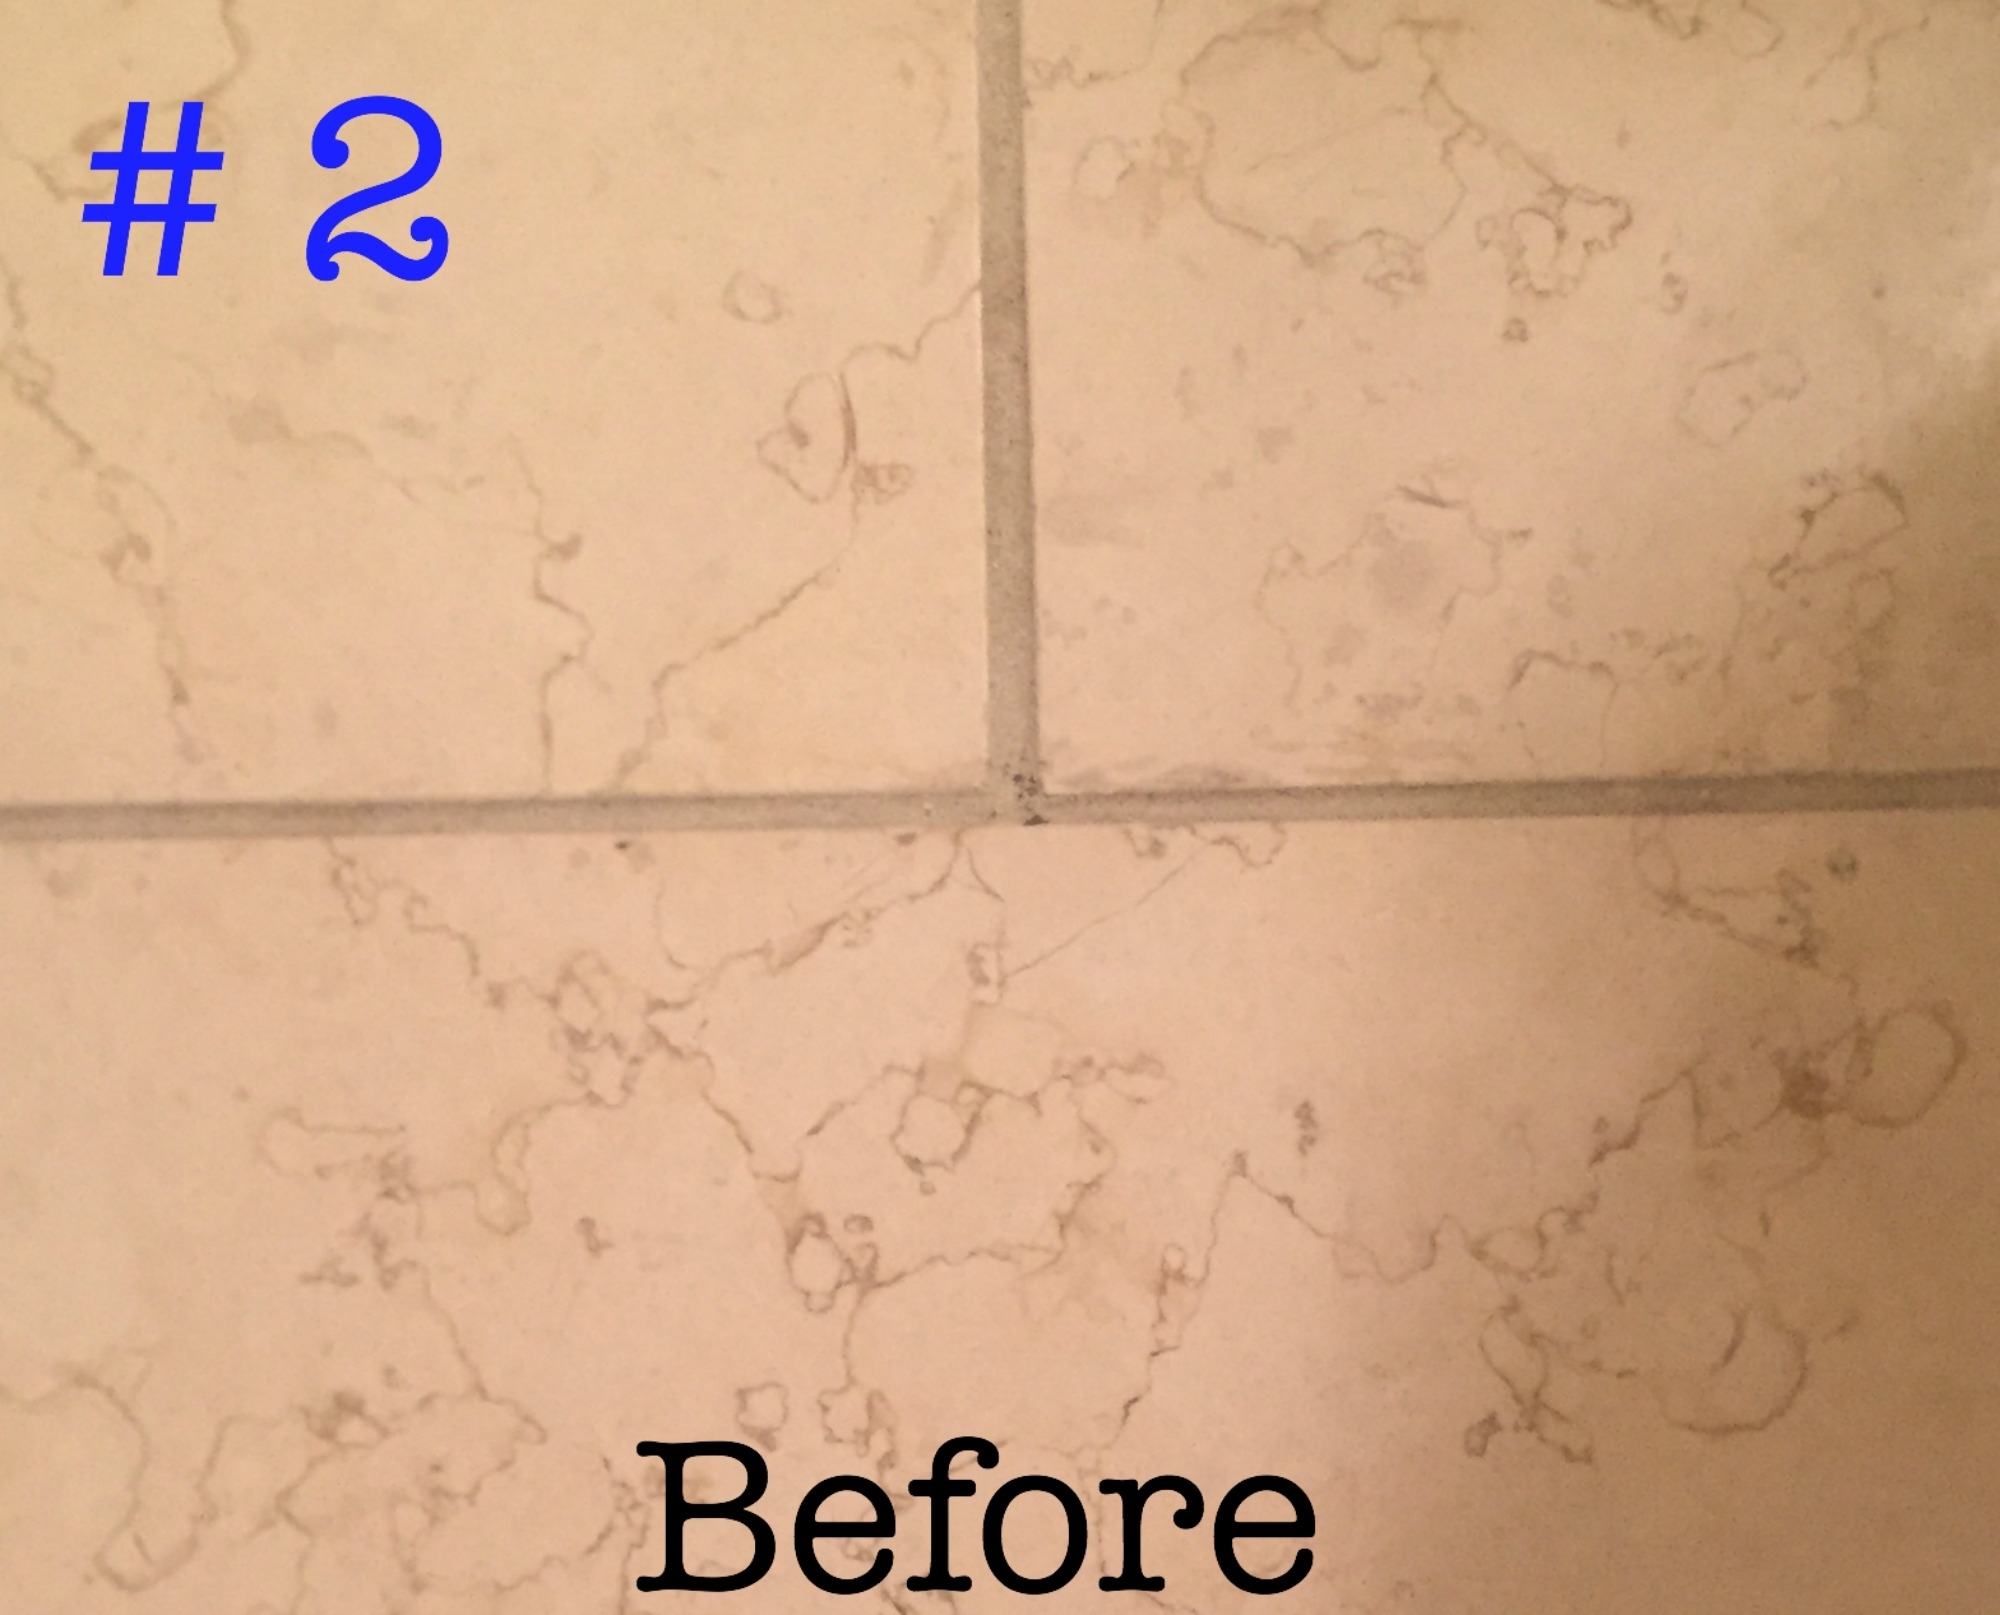 A DIY floor cleaner that actually works